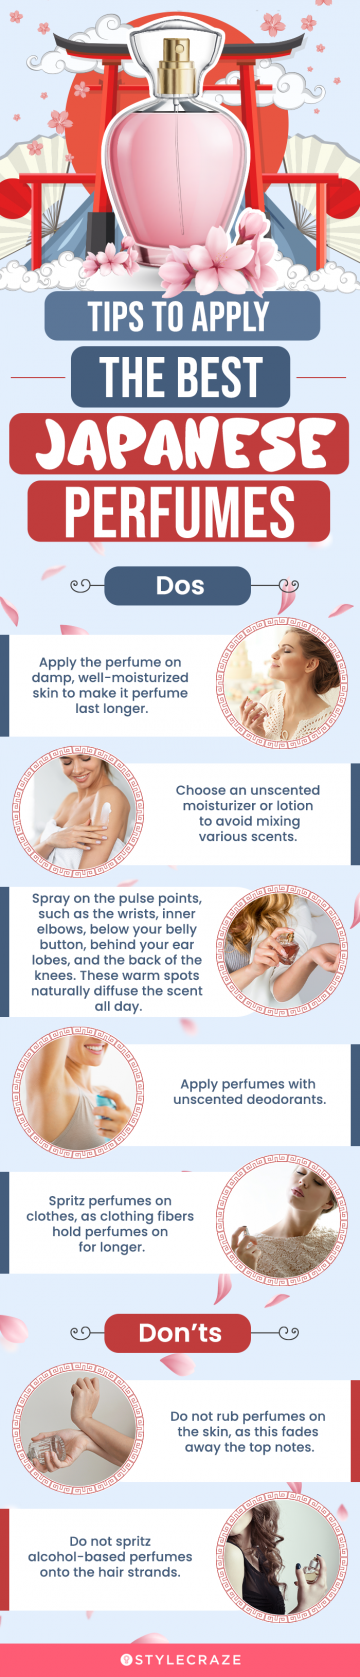 Tips To Apply The Best Japanese Perfumes (infographic)